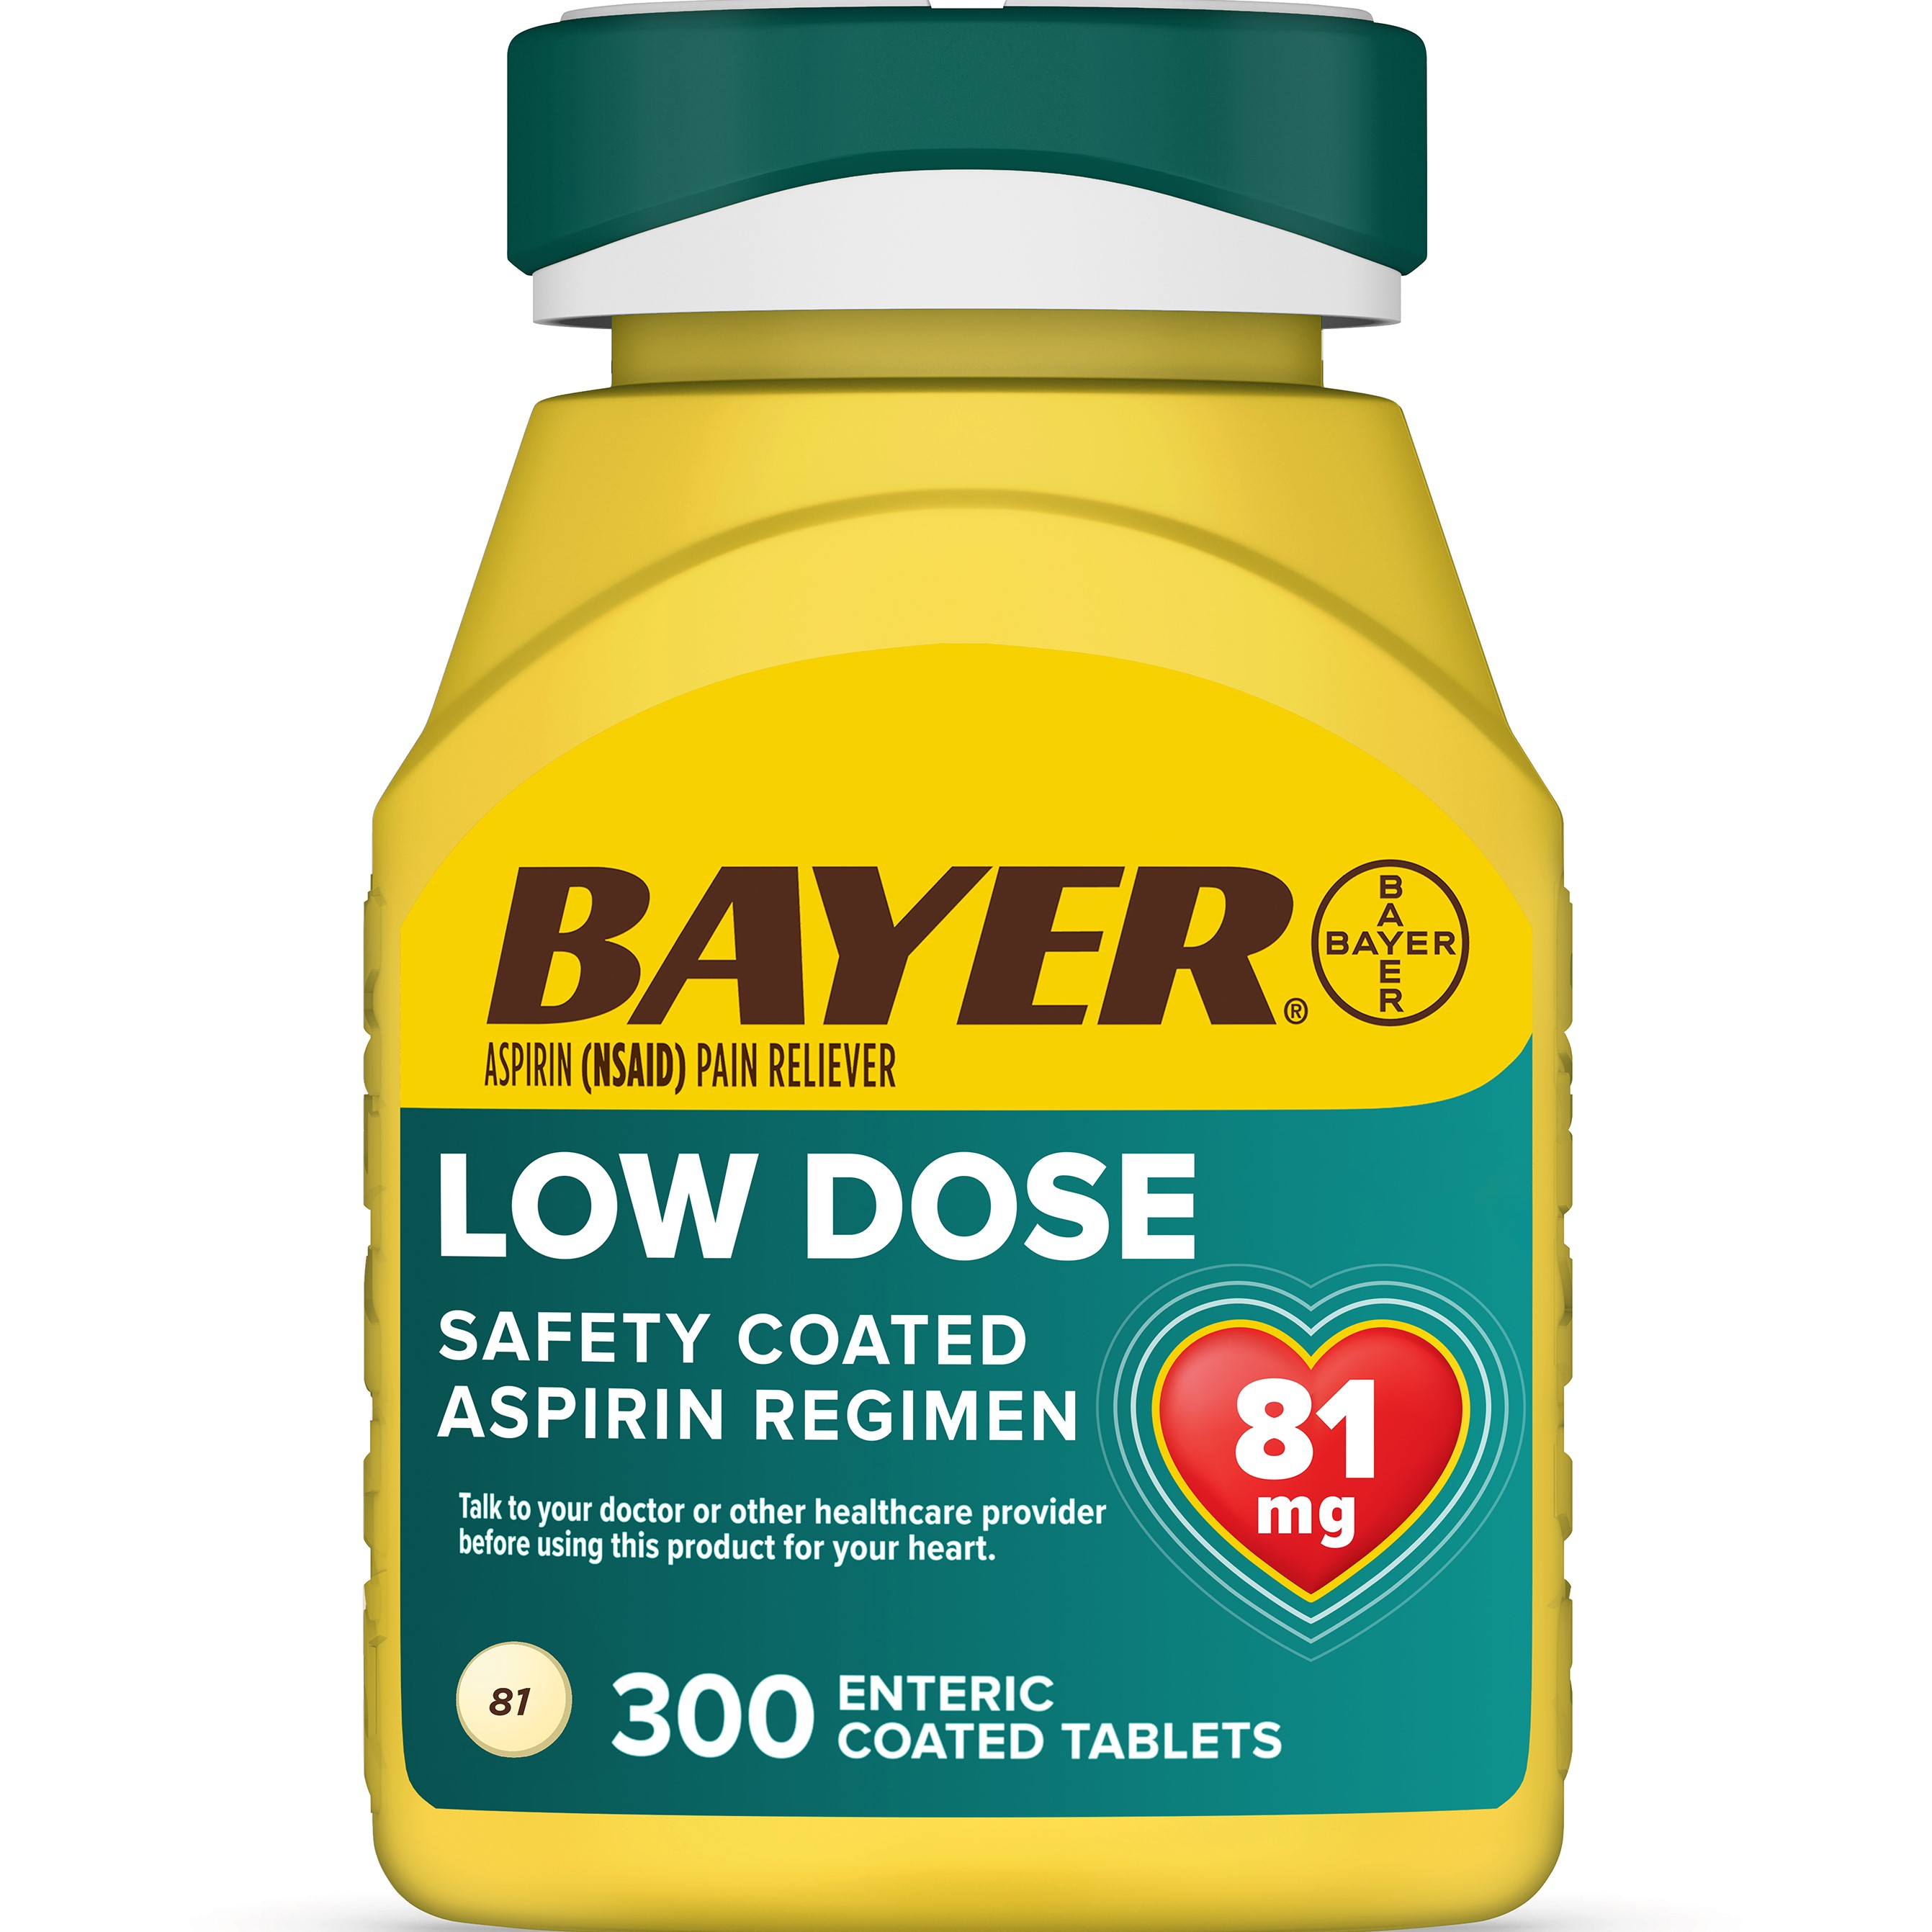 Aspirin Regimen Bayer Low Dose Pain Reliever Enteric Coated Tablets, 81mg, 300 Count - image 3 of 18